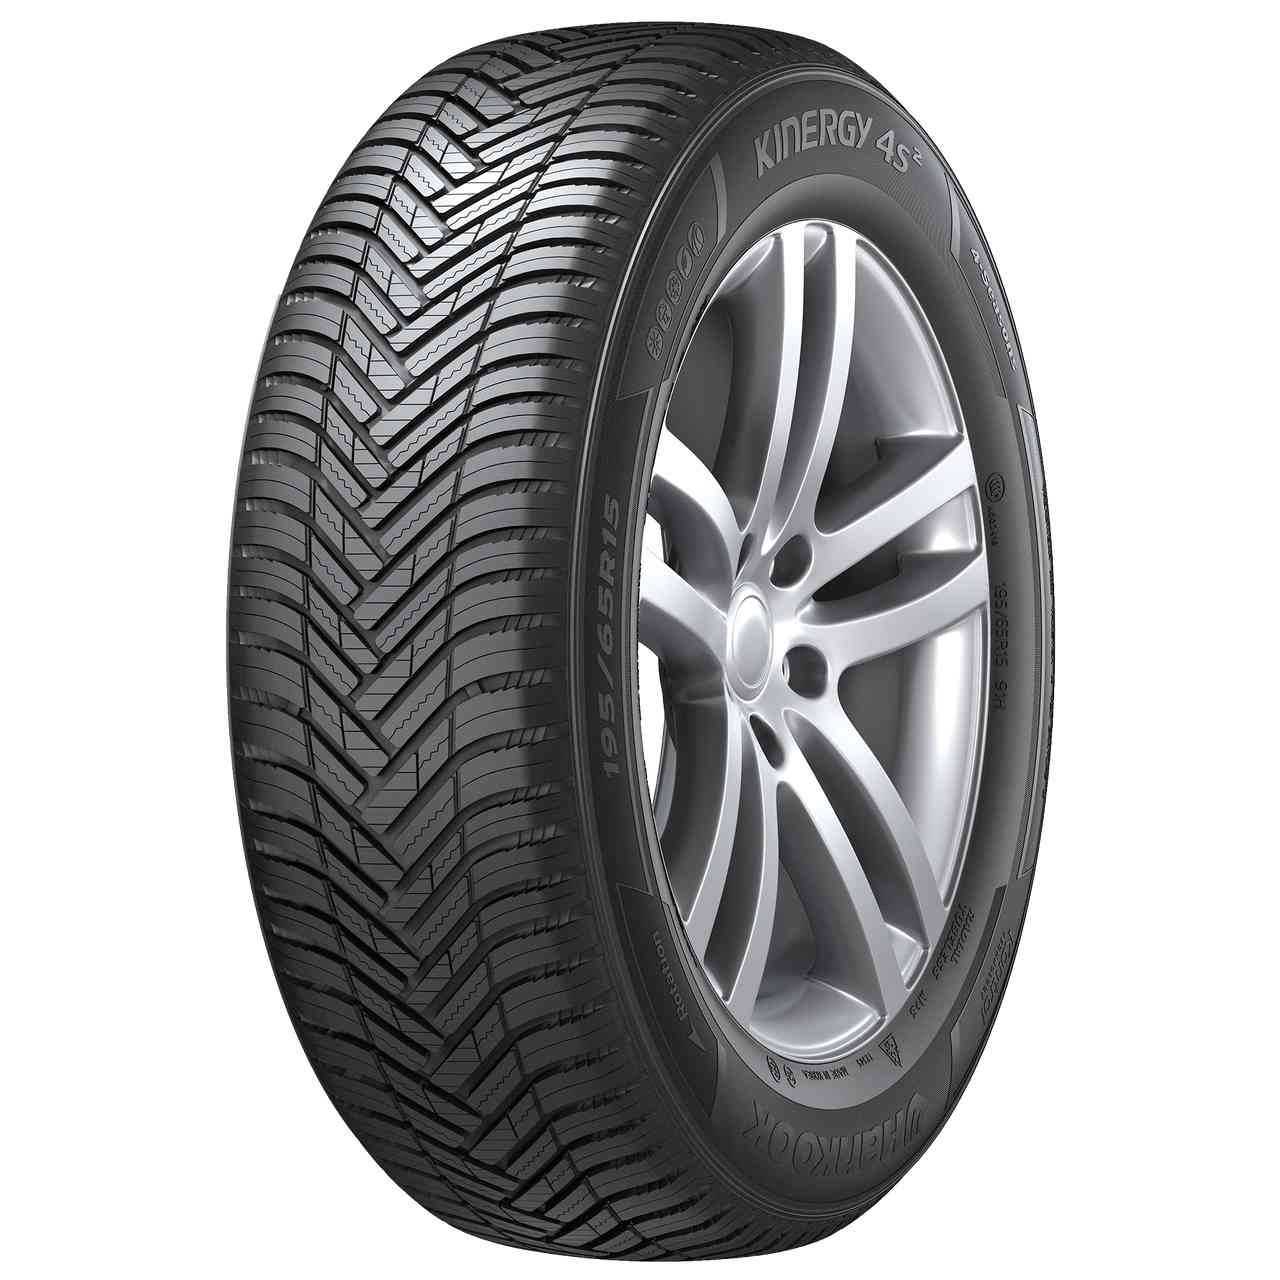 HANKOOK KINERGY 4S 2 (H750) 205/65R16 95H BSW